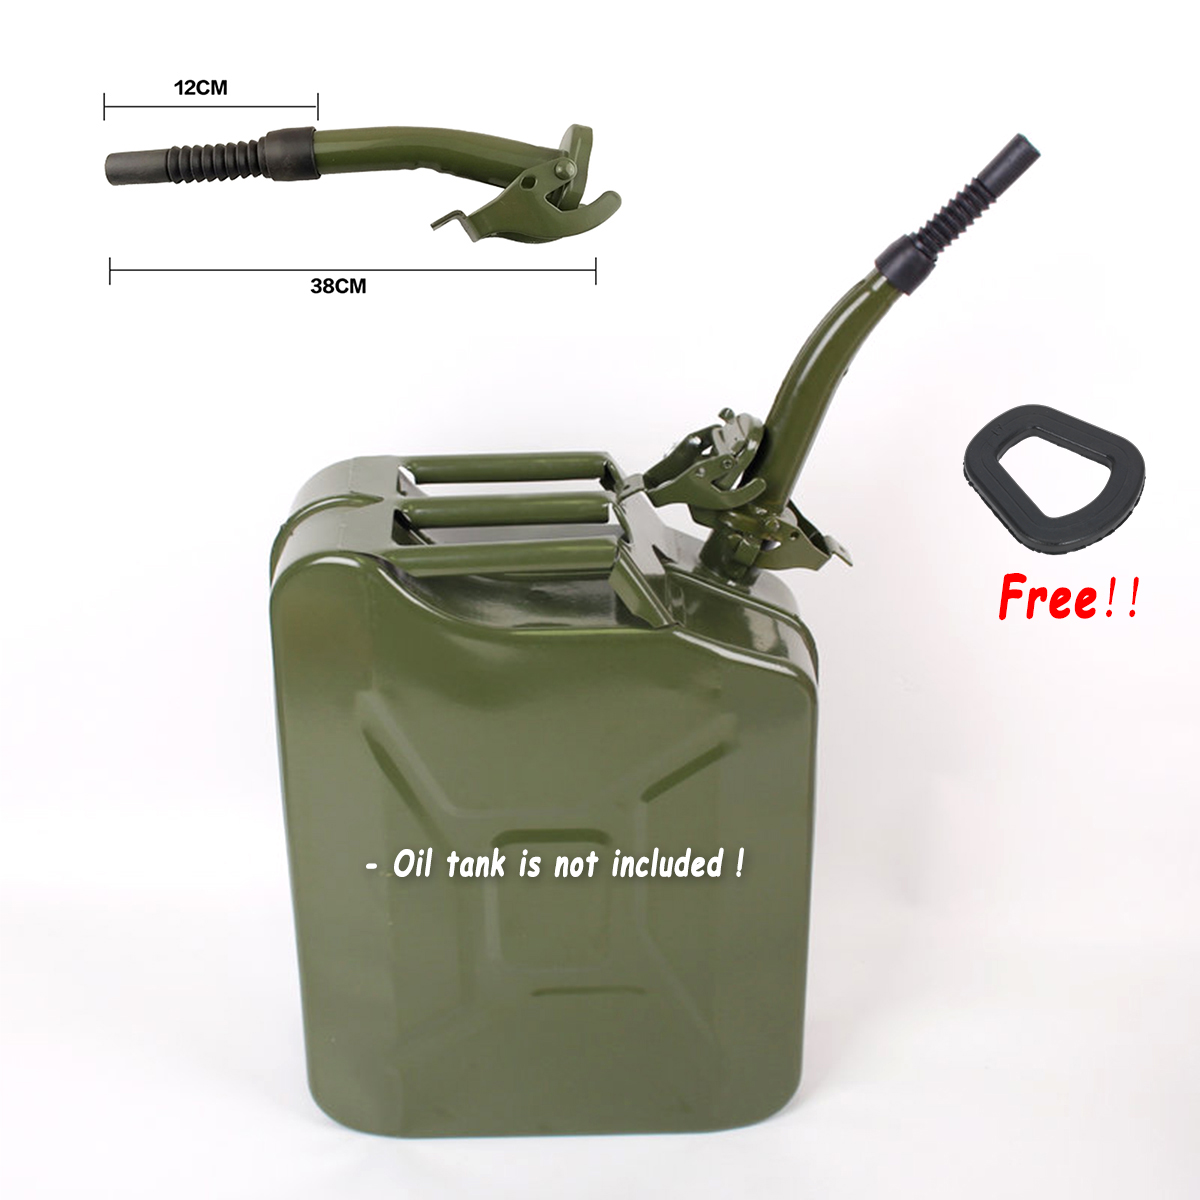 Black-Metal-Jerry-Can-Gas-Canister-Rubber-Nozzle-Spout-Military-Style-Clamp-20L-1600813-1